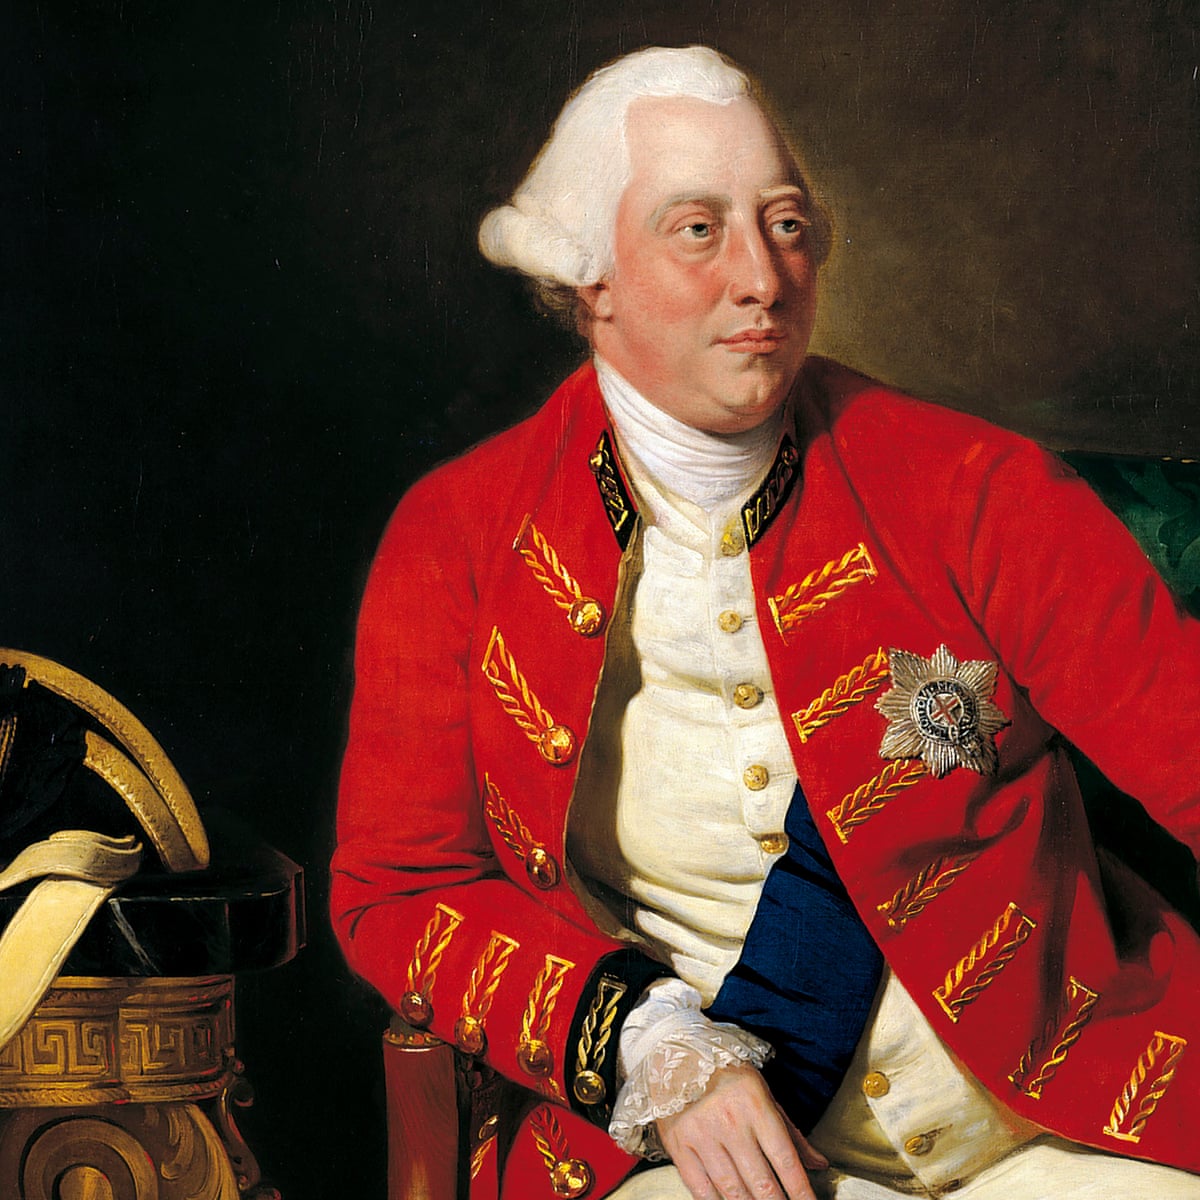 Historian Andrew Roberts Explores “The Last King of America” King George III in Latest Book